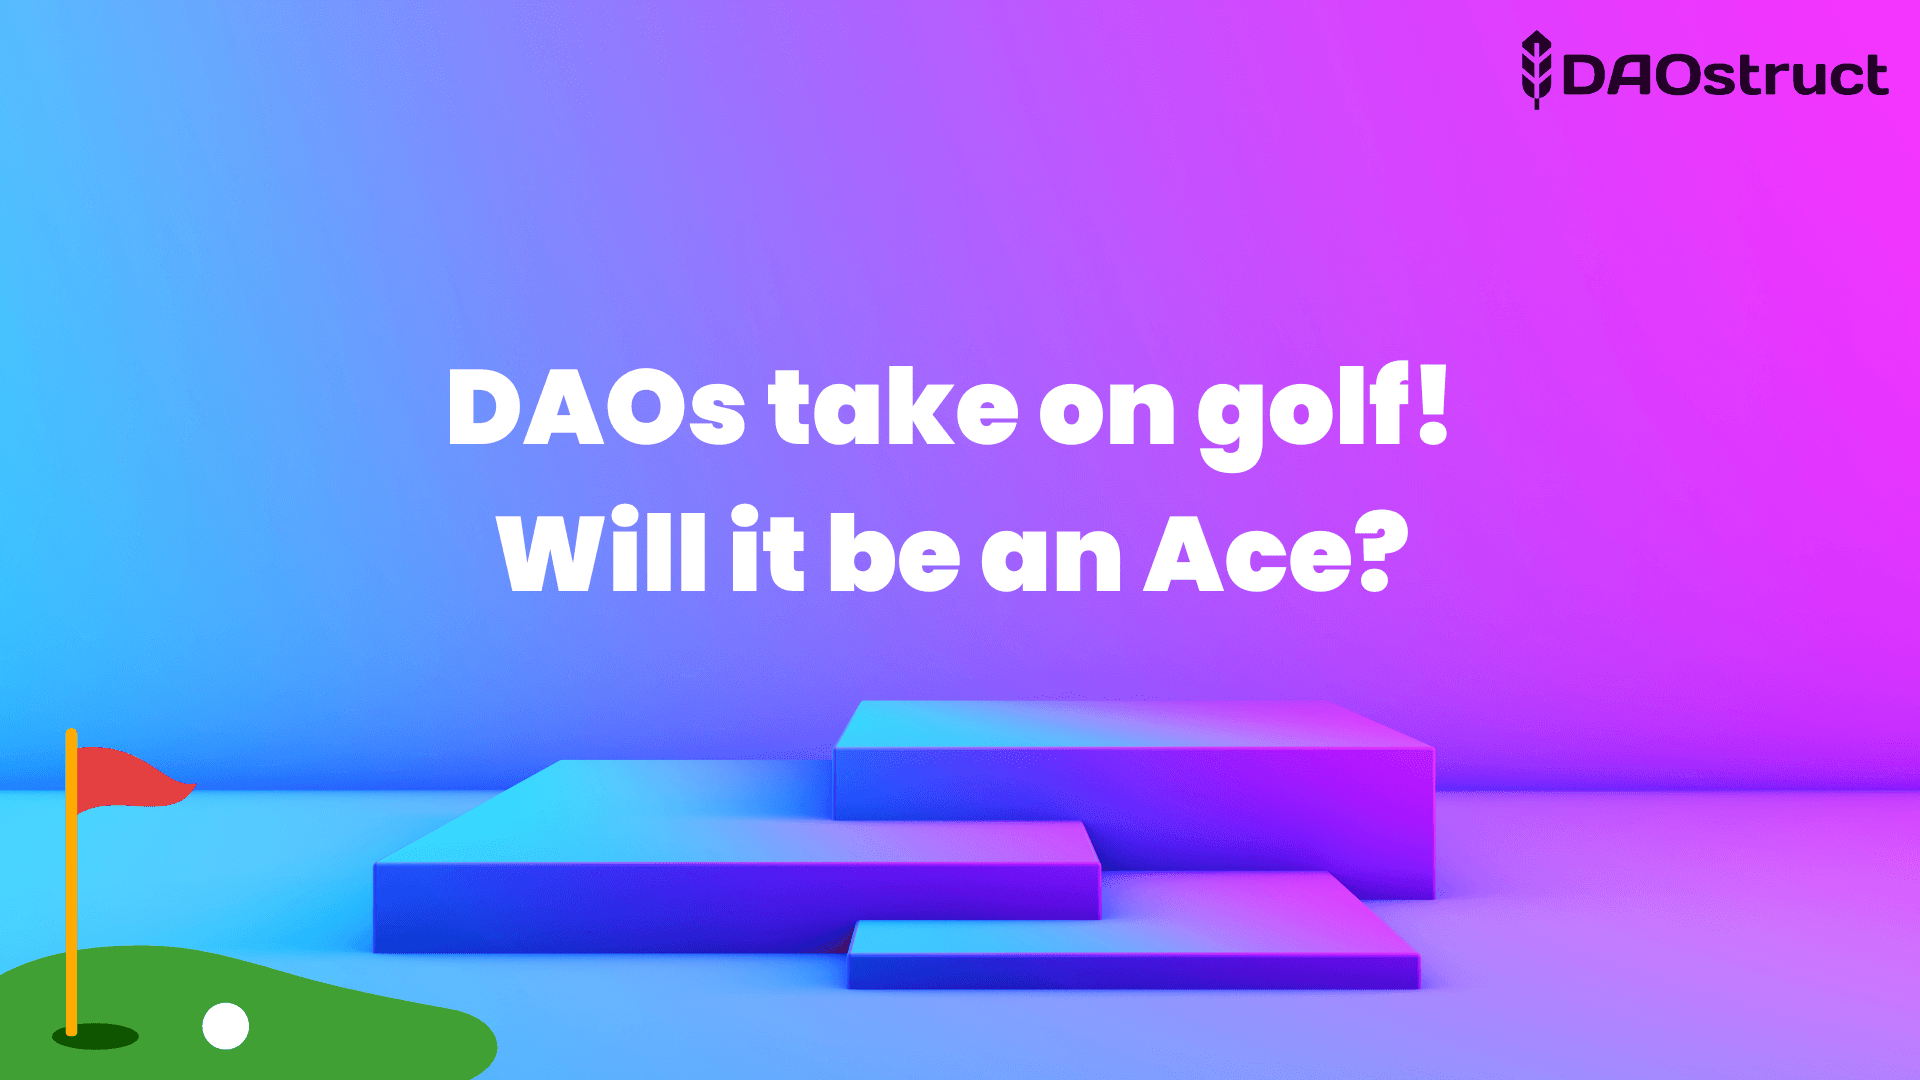 DAOs take on golf! Will it be an Ace? 